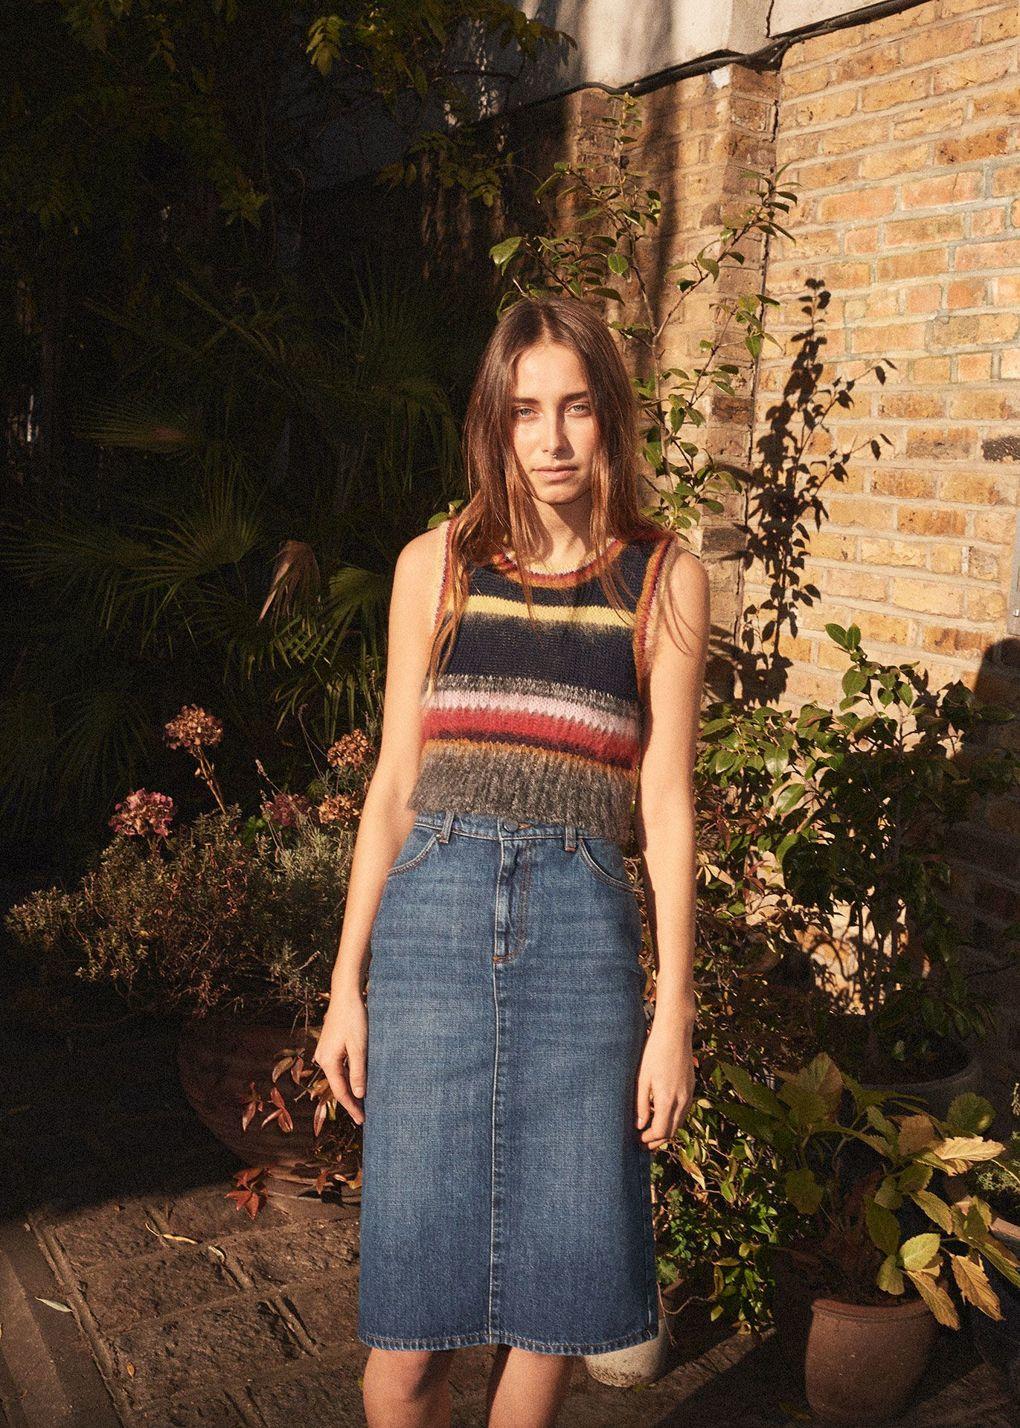 ALEXA CHUNG’S EPONYMOUS FASHION BRAND IS FINALLY HERE – W.T. Mag